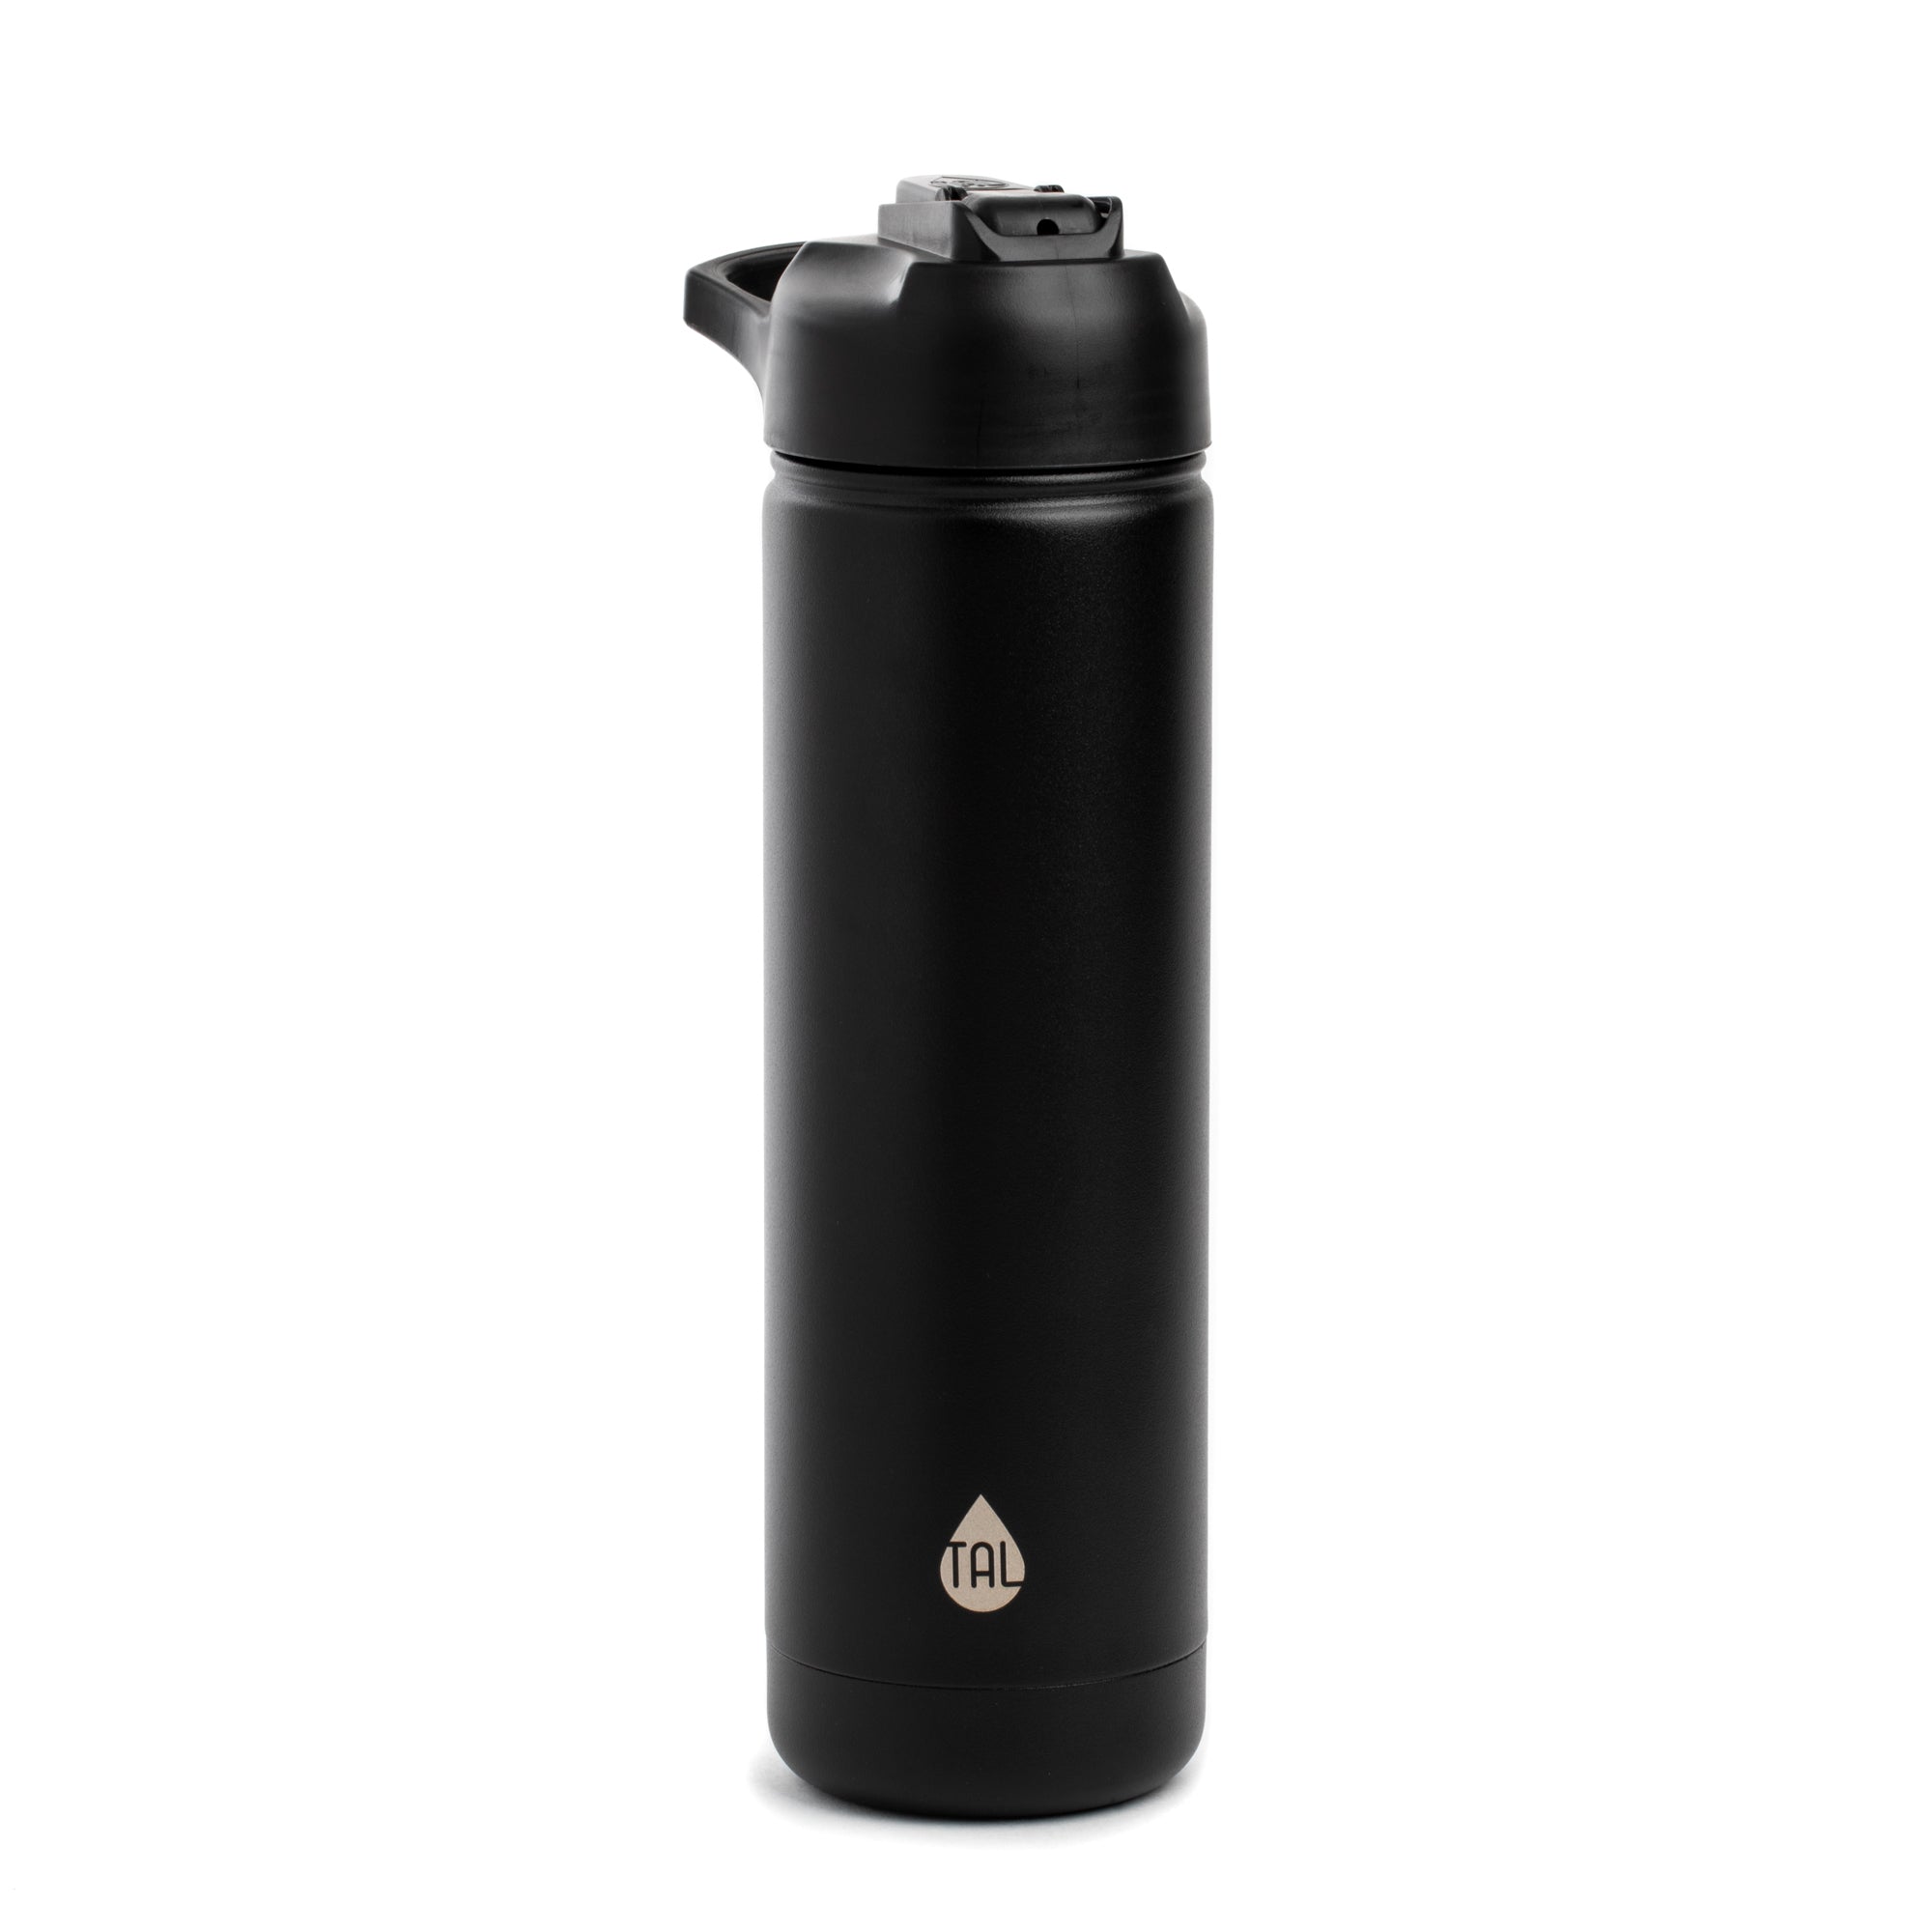 Tal 26 Oz Double Wall Vacuum Insulated Stainless Steel Water